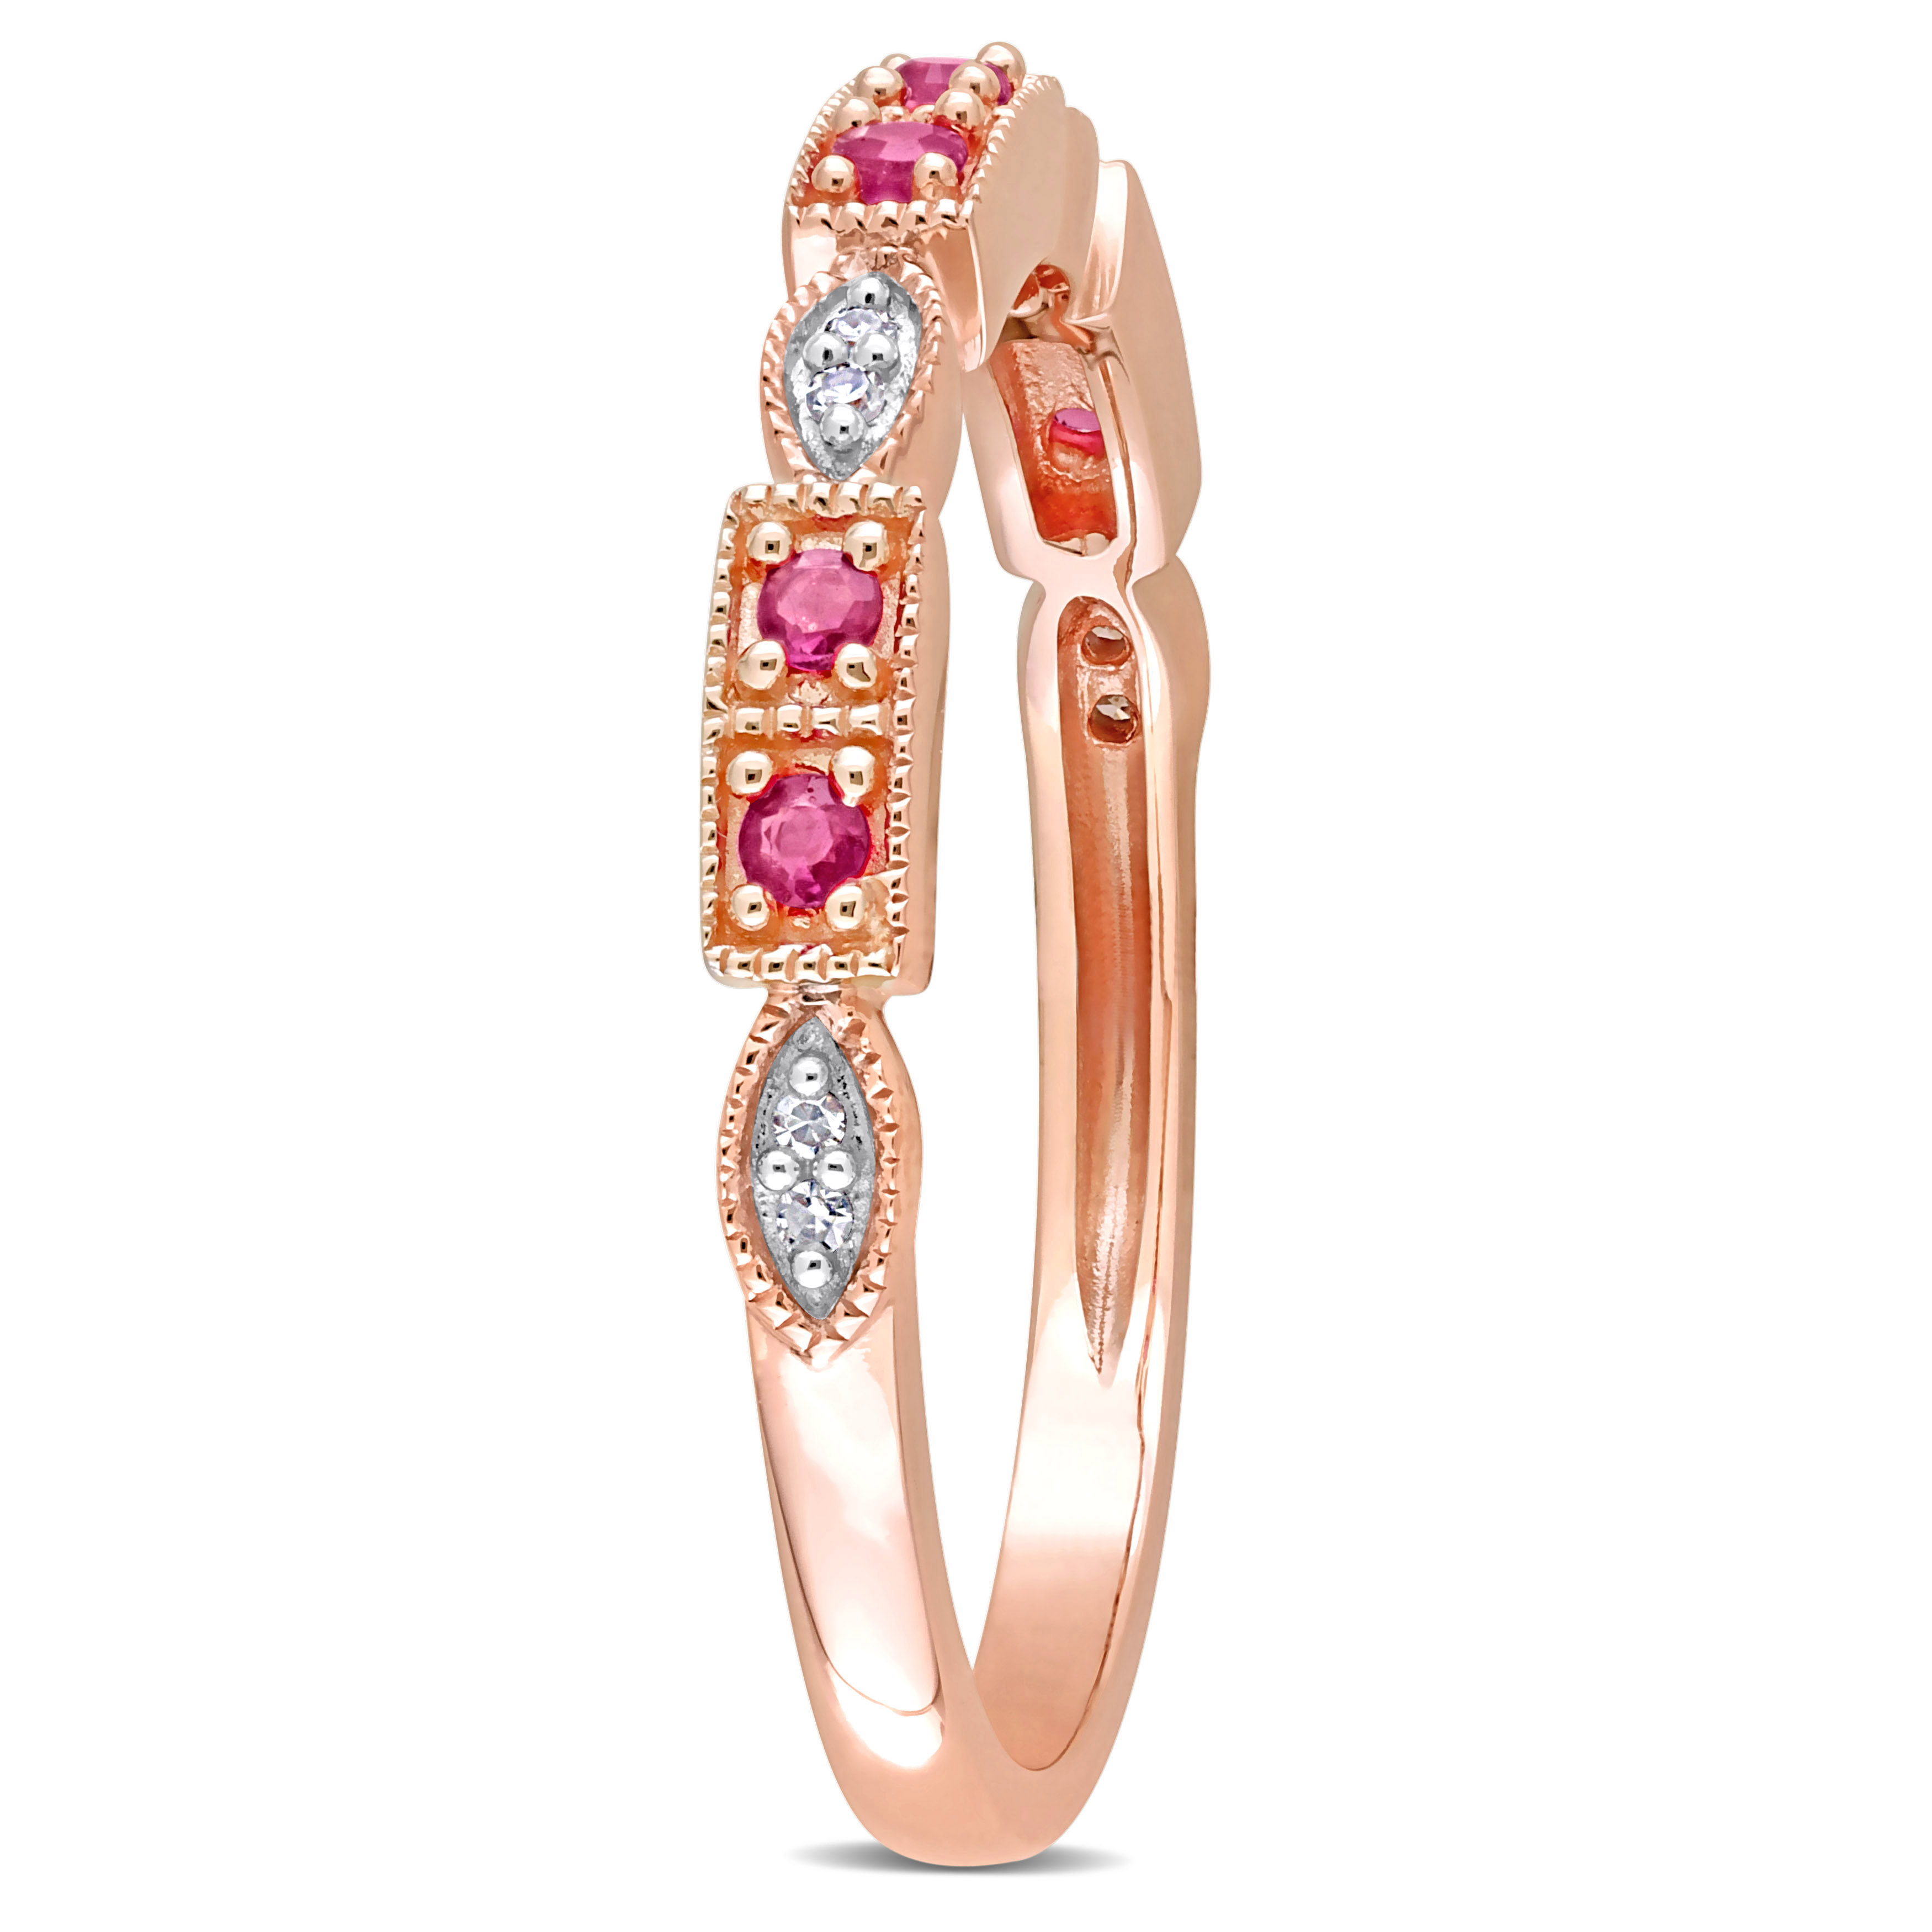 1/8 CT TGW Ruby and Diamond Accent Semi-Eternity Ring in 10k Rose Gold